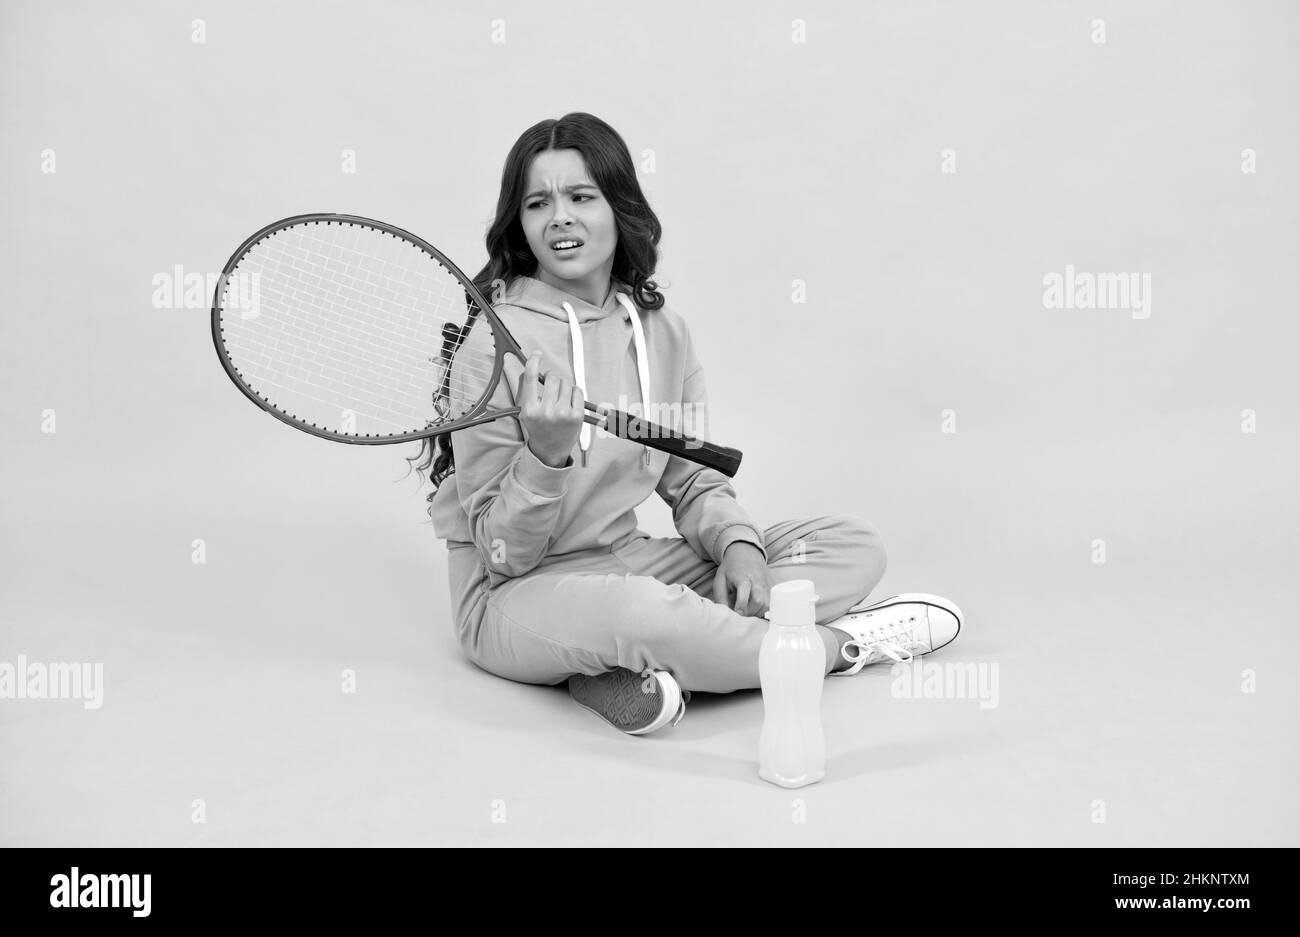 unhappy kid sit with racket water bottle. child with tennis racquet. teen girl going to drink water Stock Photo